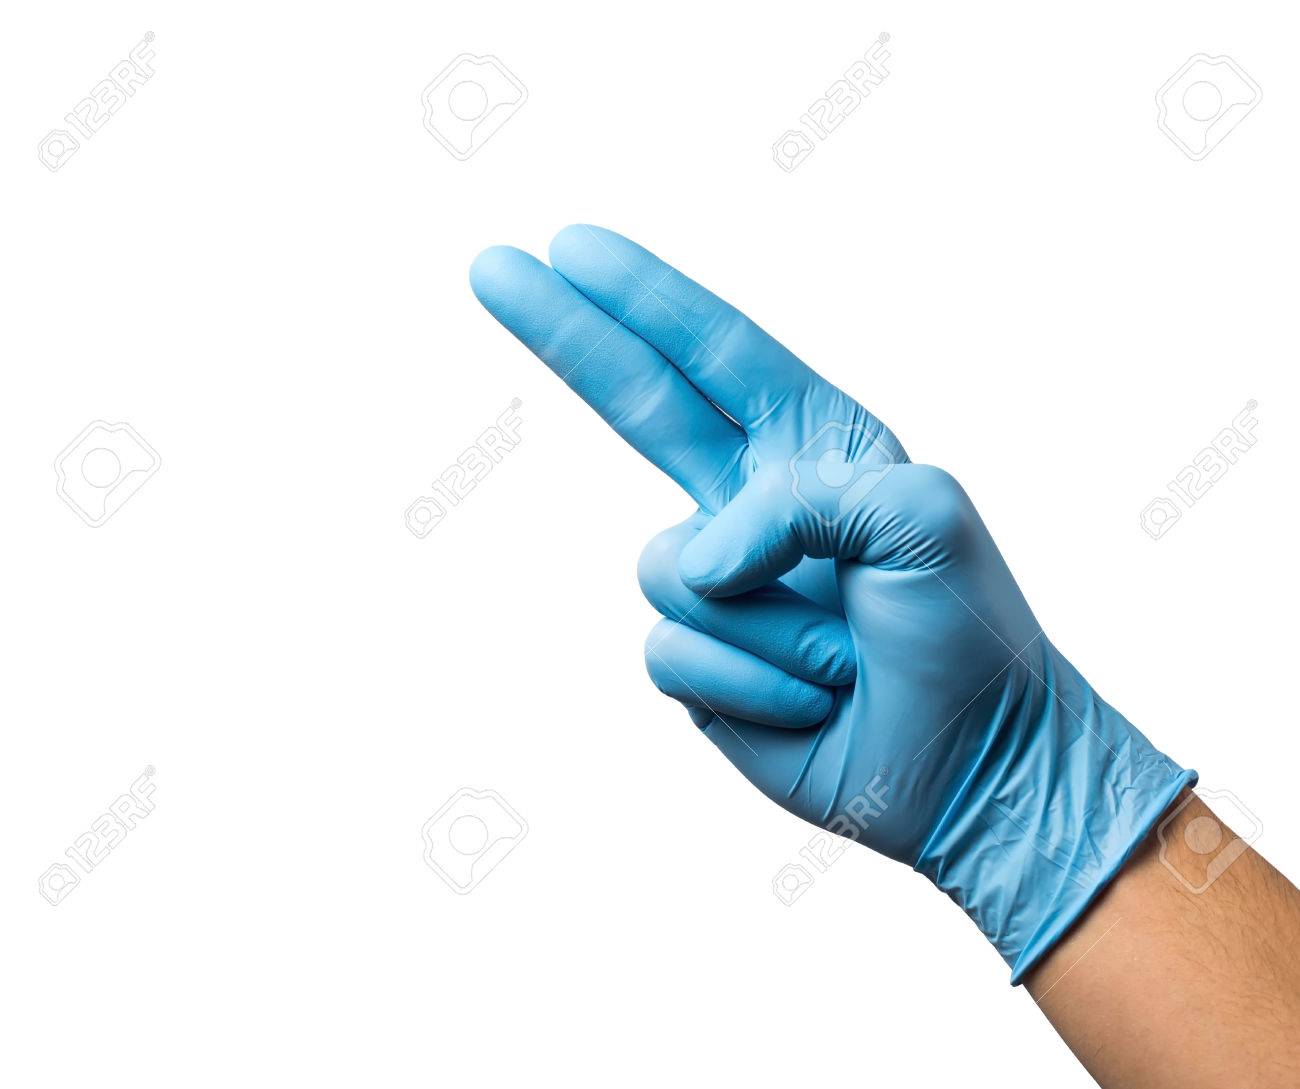 38165237-hand-wearing-rubber-glove-make-hand-like-number-two-use-for-healthy-or-medic-.jpg